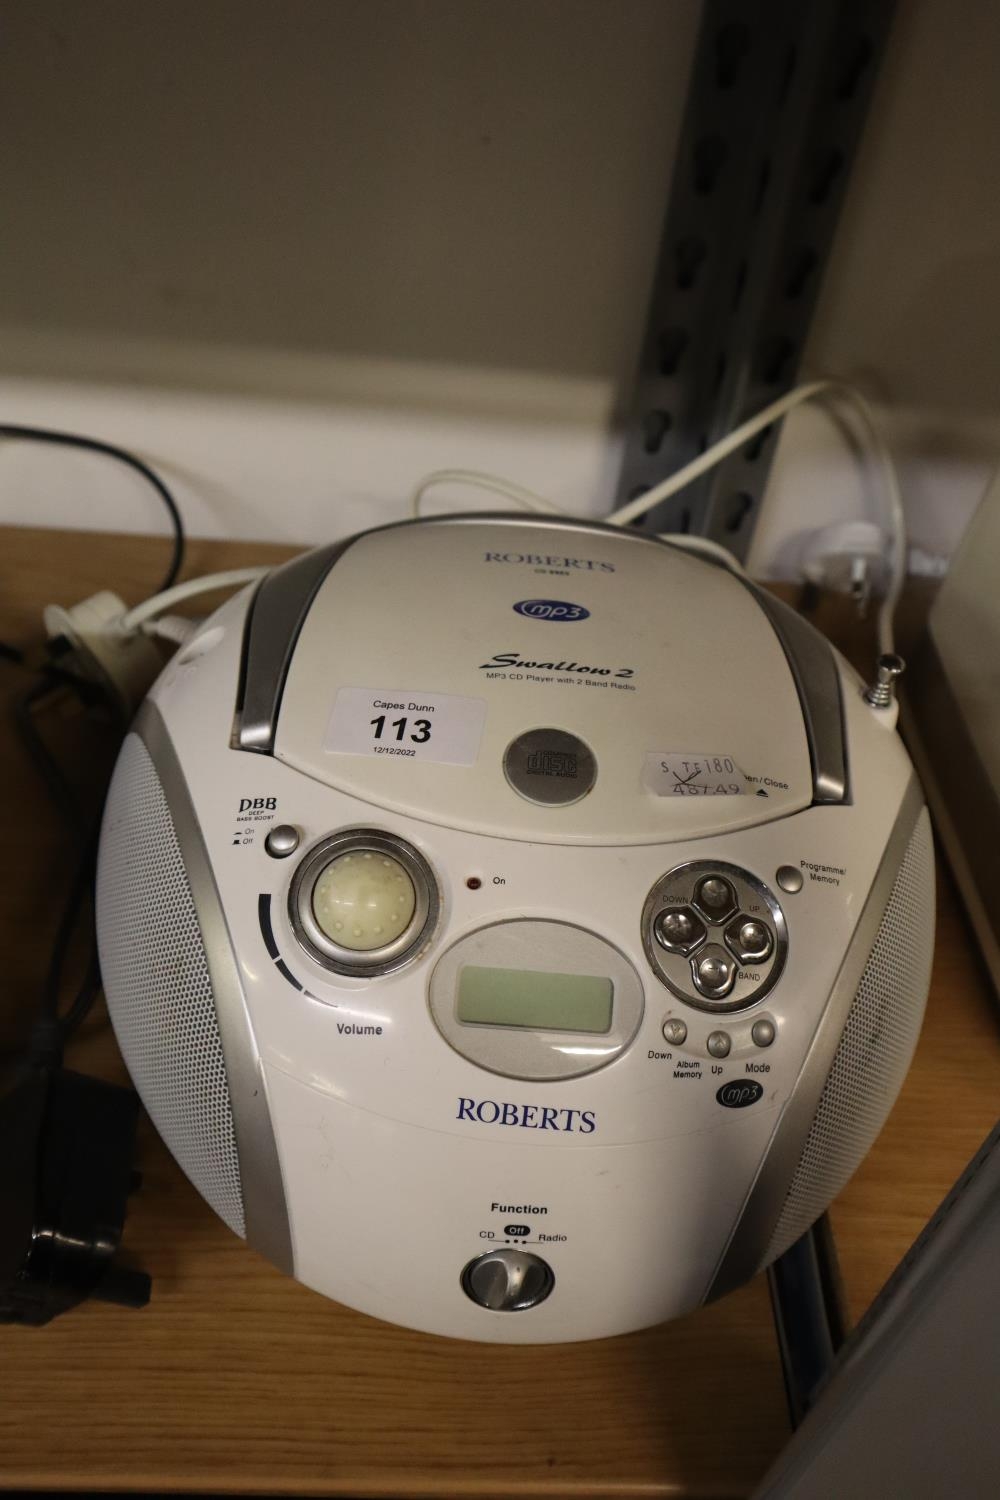 ROBERTS 'SWALLOW 2' MP3 CD PLAYER WITH 2 BAND RADIO IN WHITE CASE